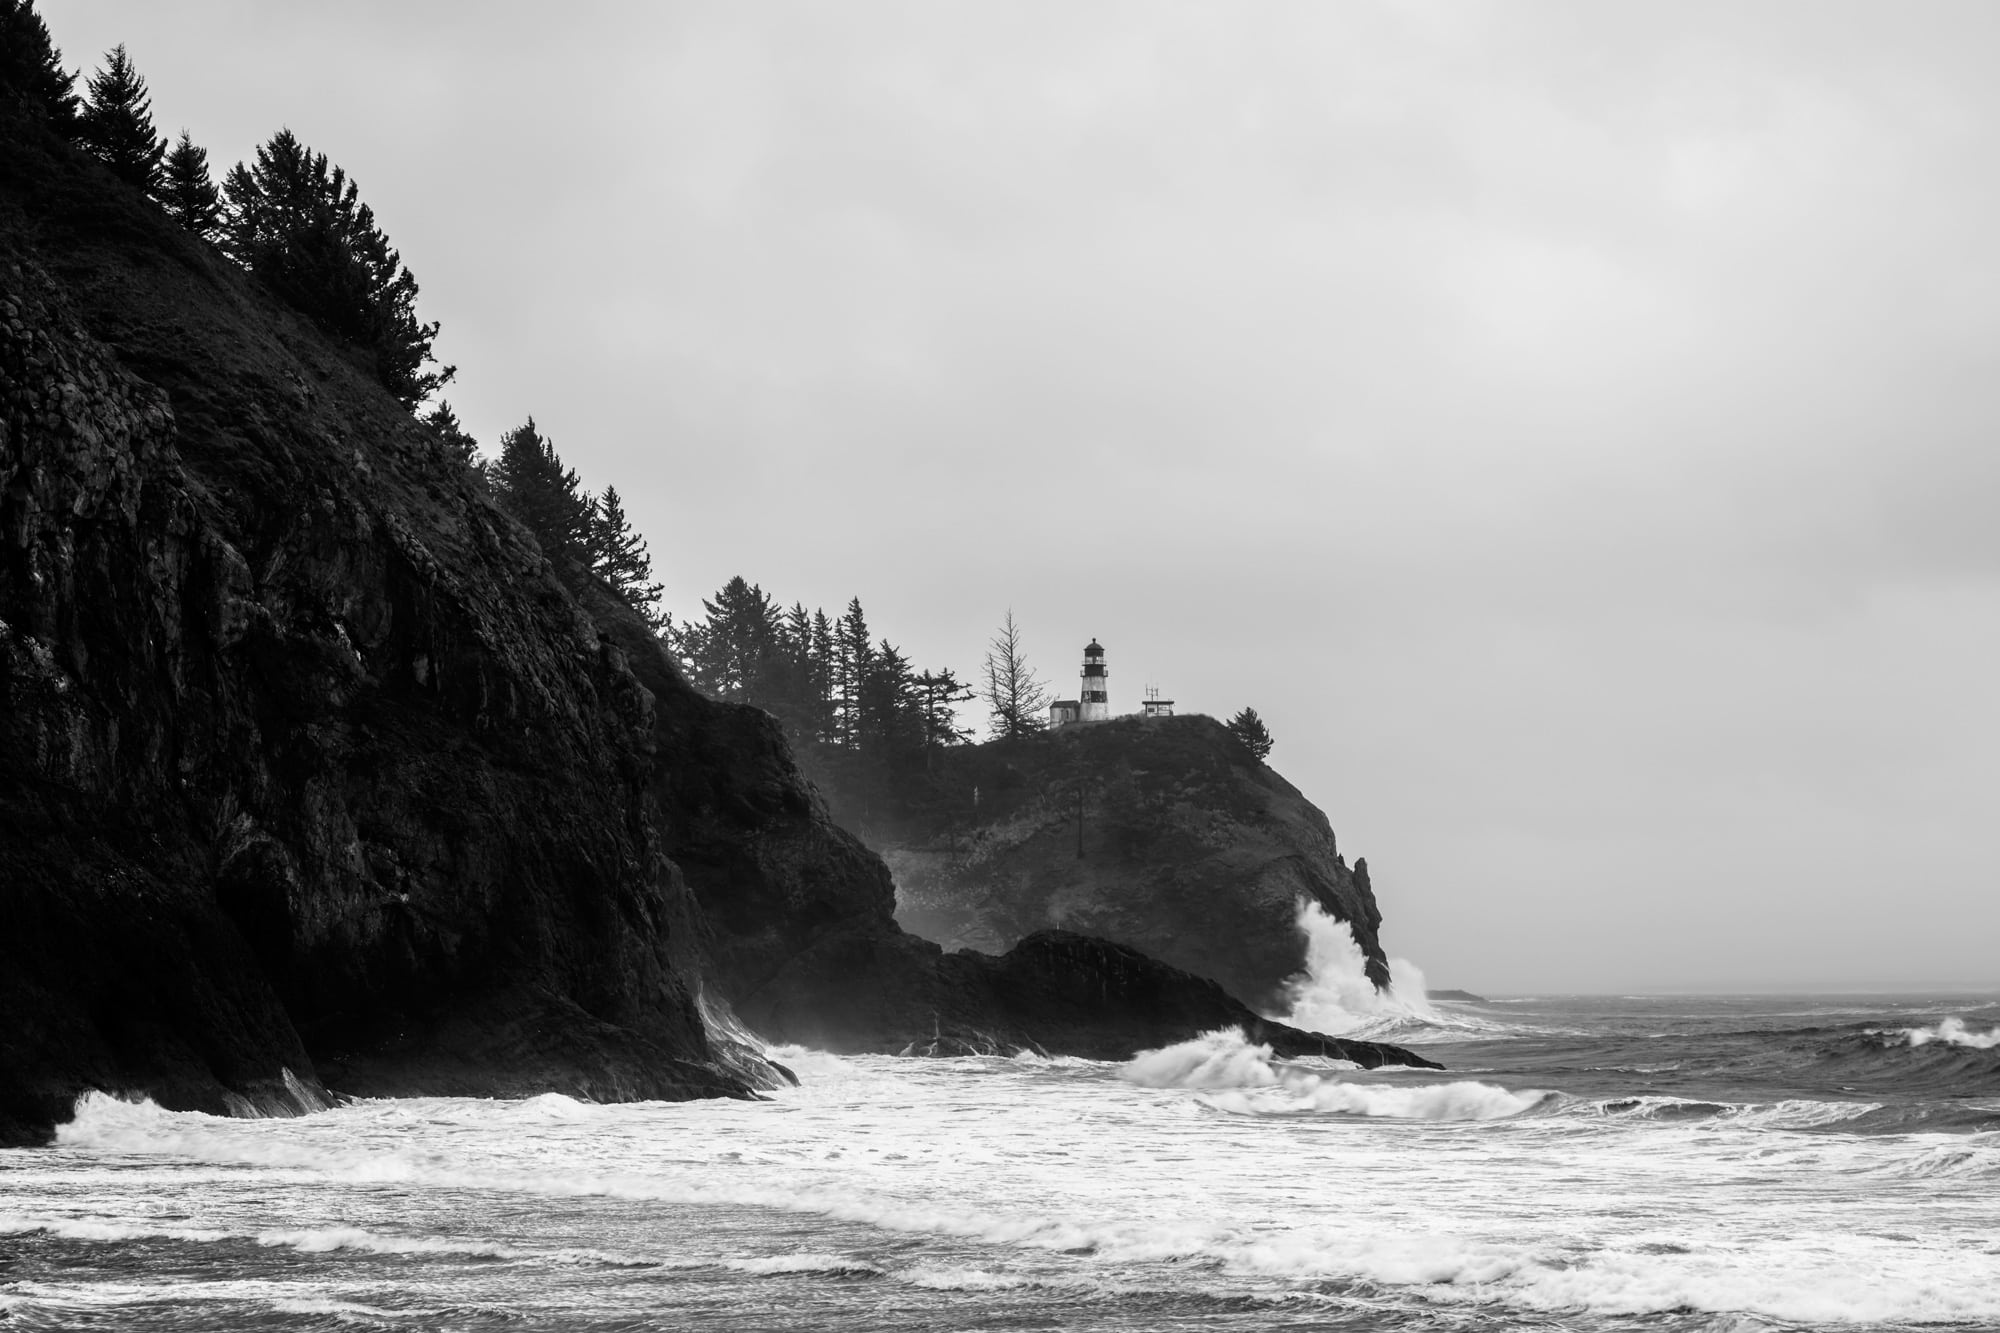 A black and white photograph of Cape Disappointment Lighthouse near Illawco, Washington.